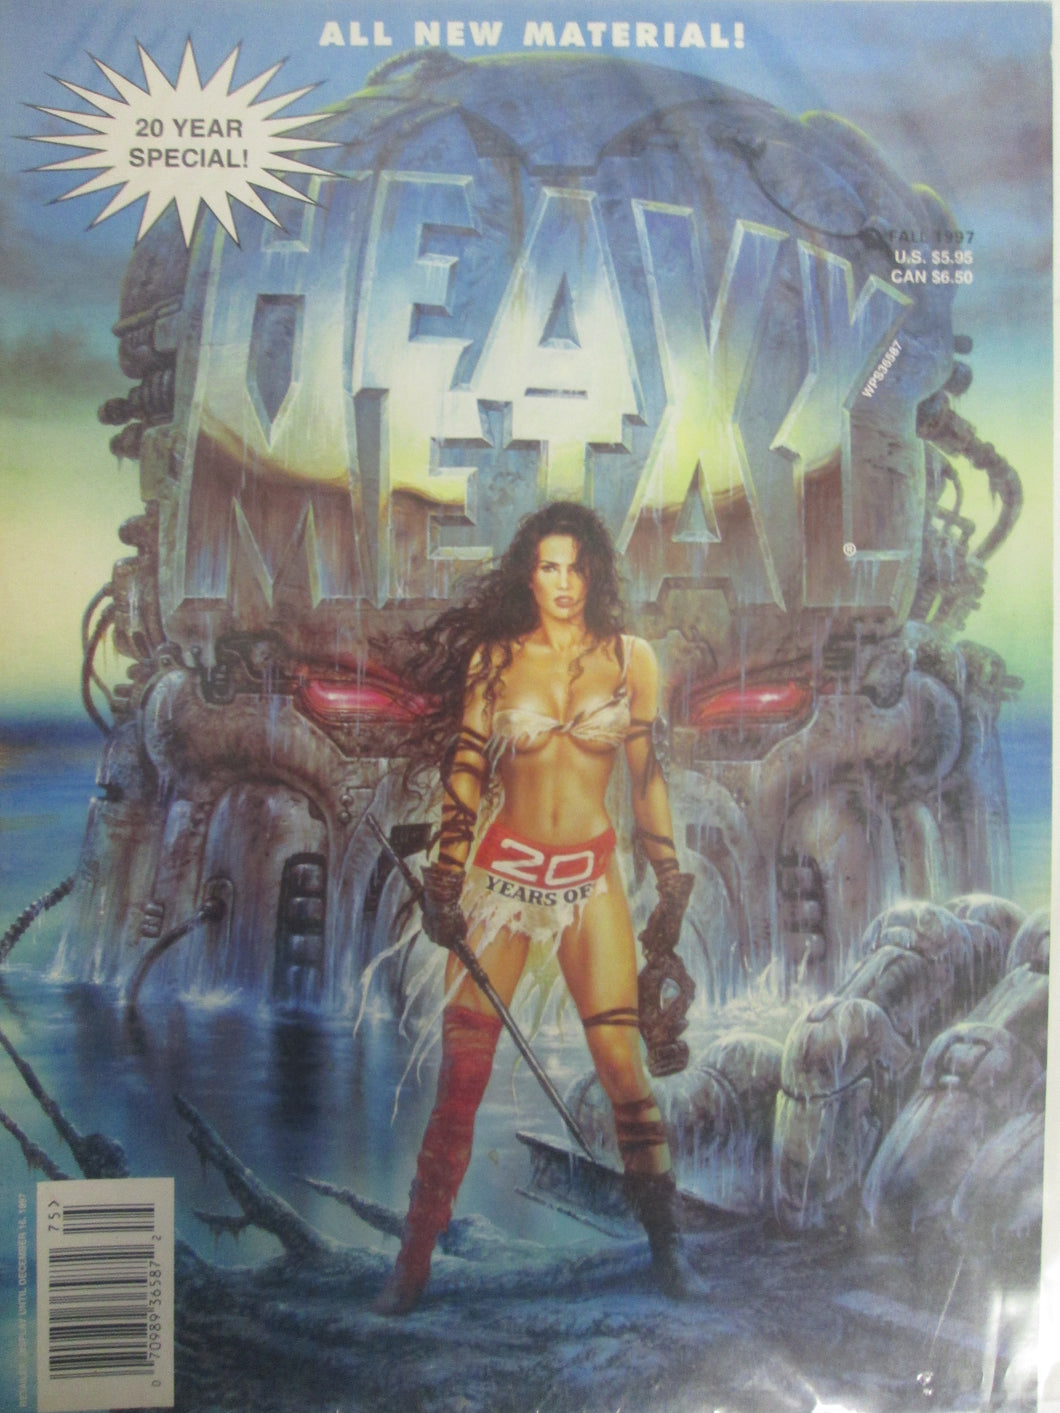 Heavy Metal Magazine Fall 1997 20 Year Special